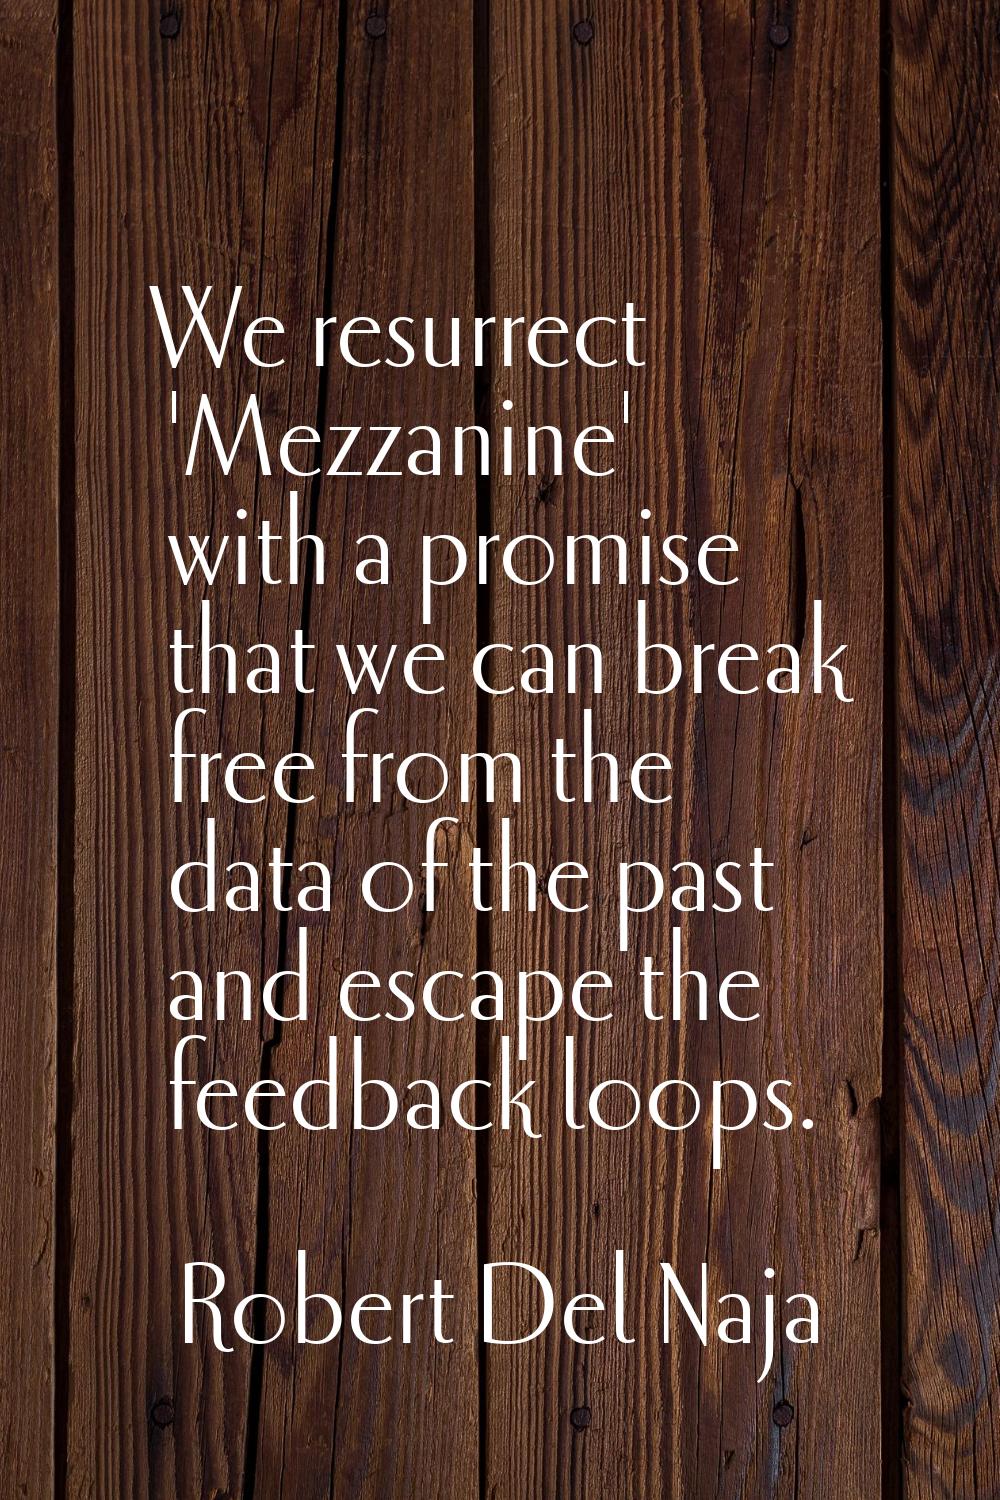 We resurrect 'Mezzanine' with a promise that we can break free from the data of the past and escape